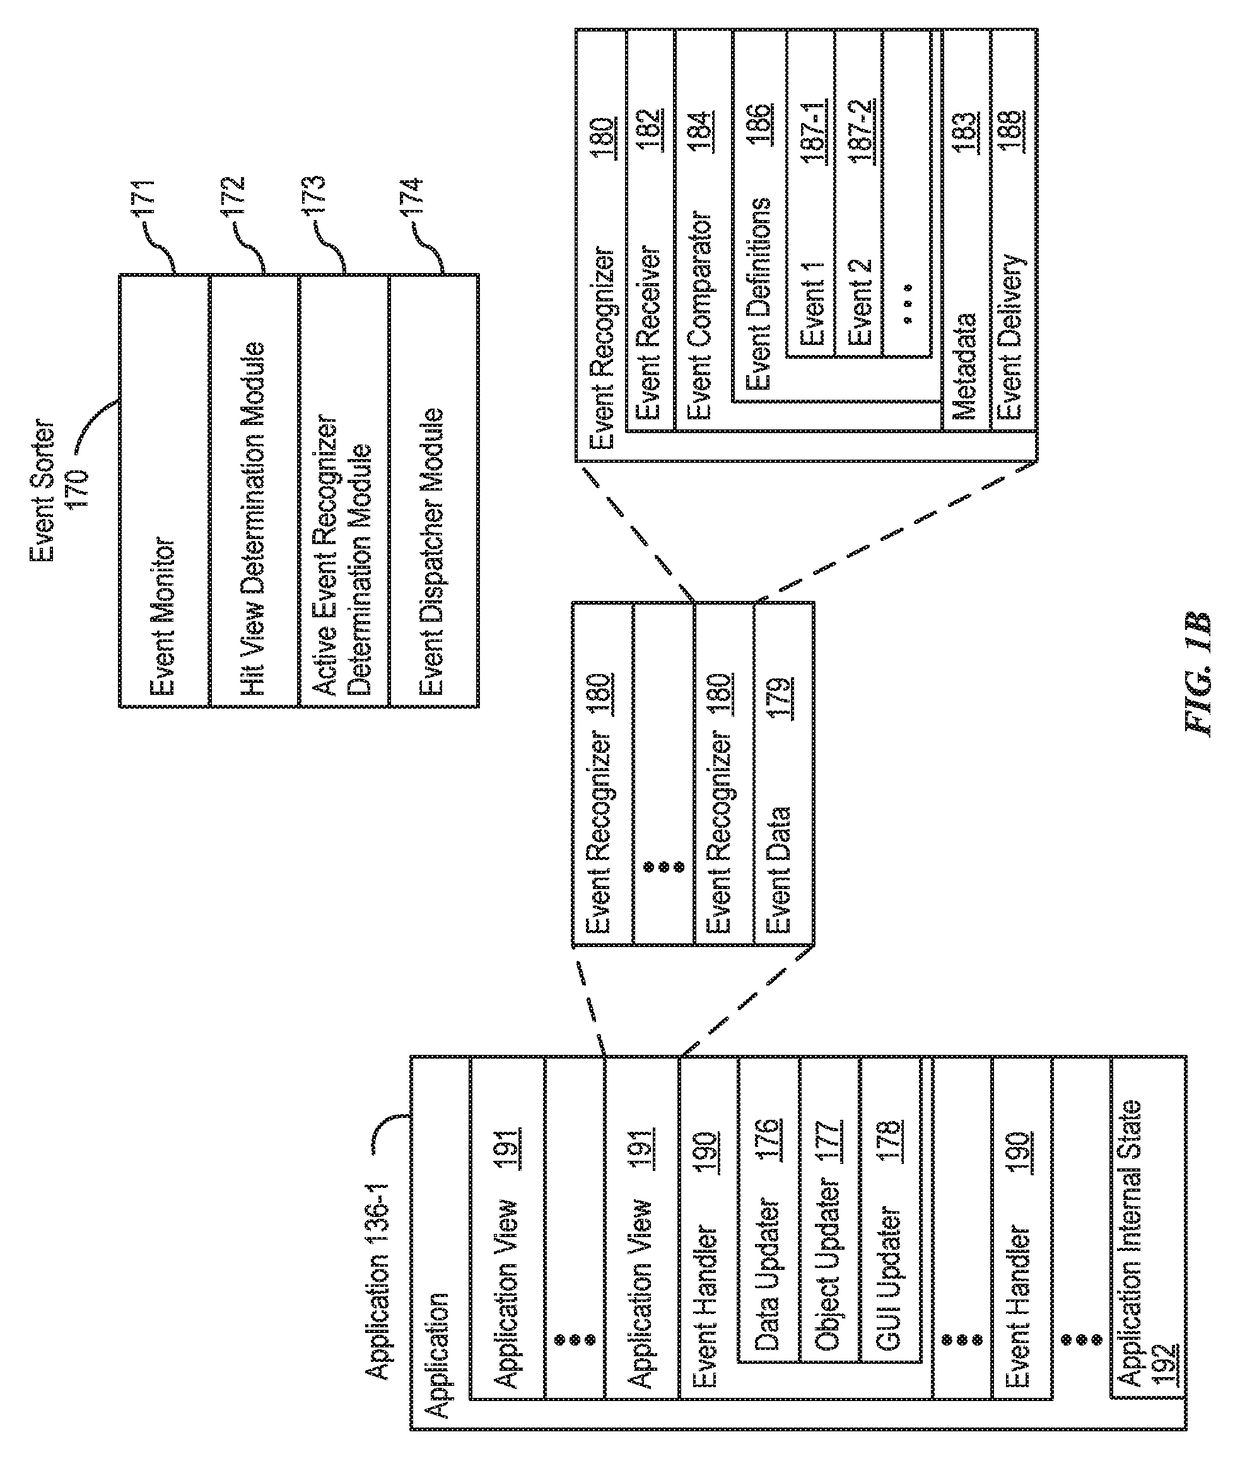 Dynamically adjusting touch hysteresis based on contextual data